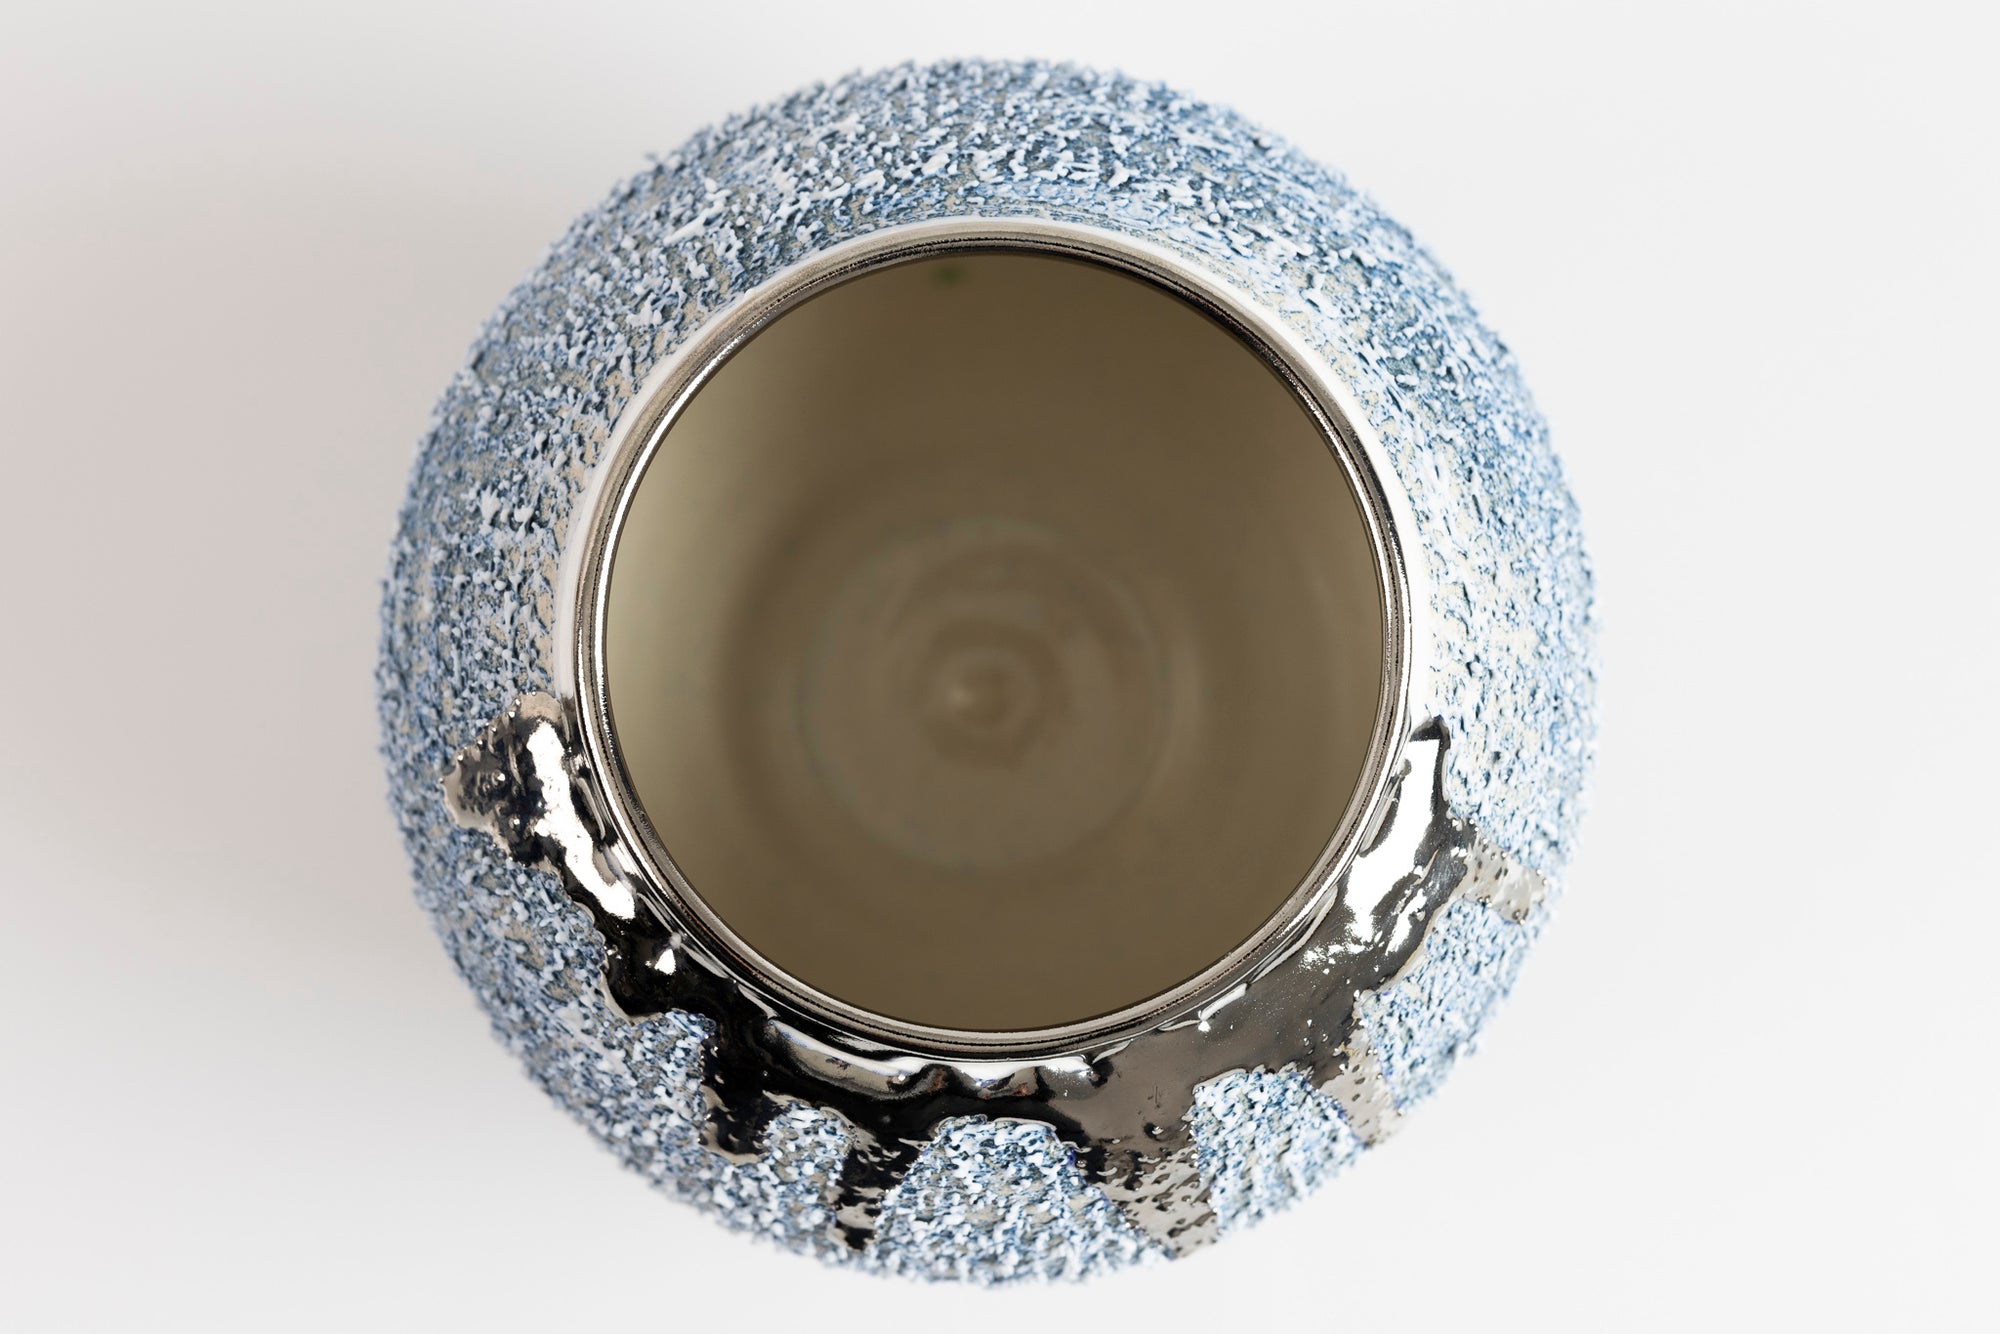 Textured moon jar with platinum lustre, by Alex McCarthy, available from Padstow Gallery, Cornwall